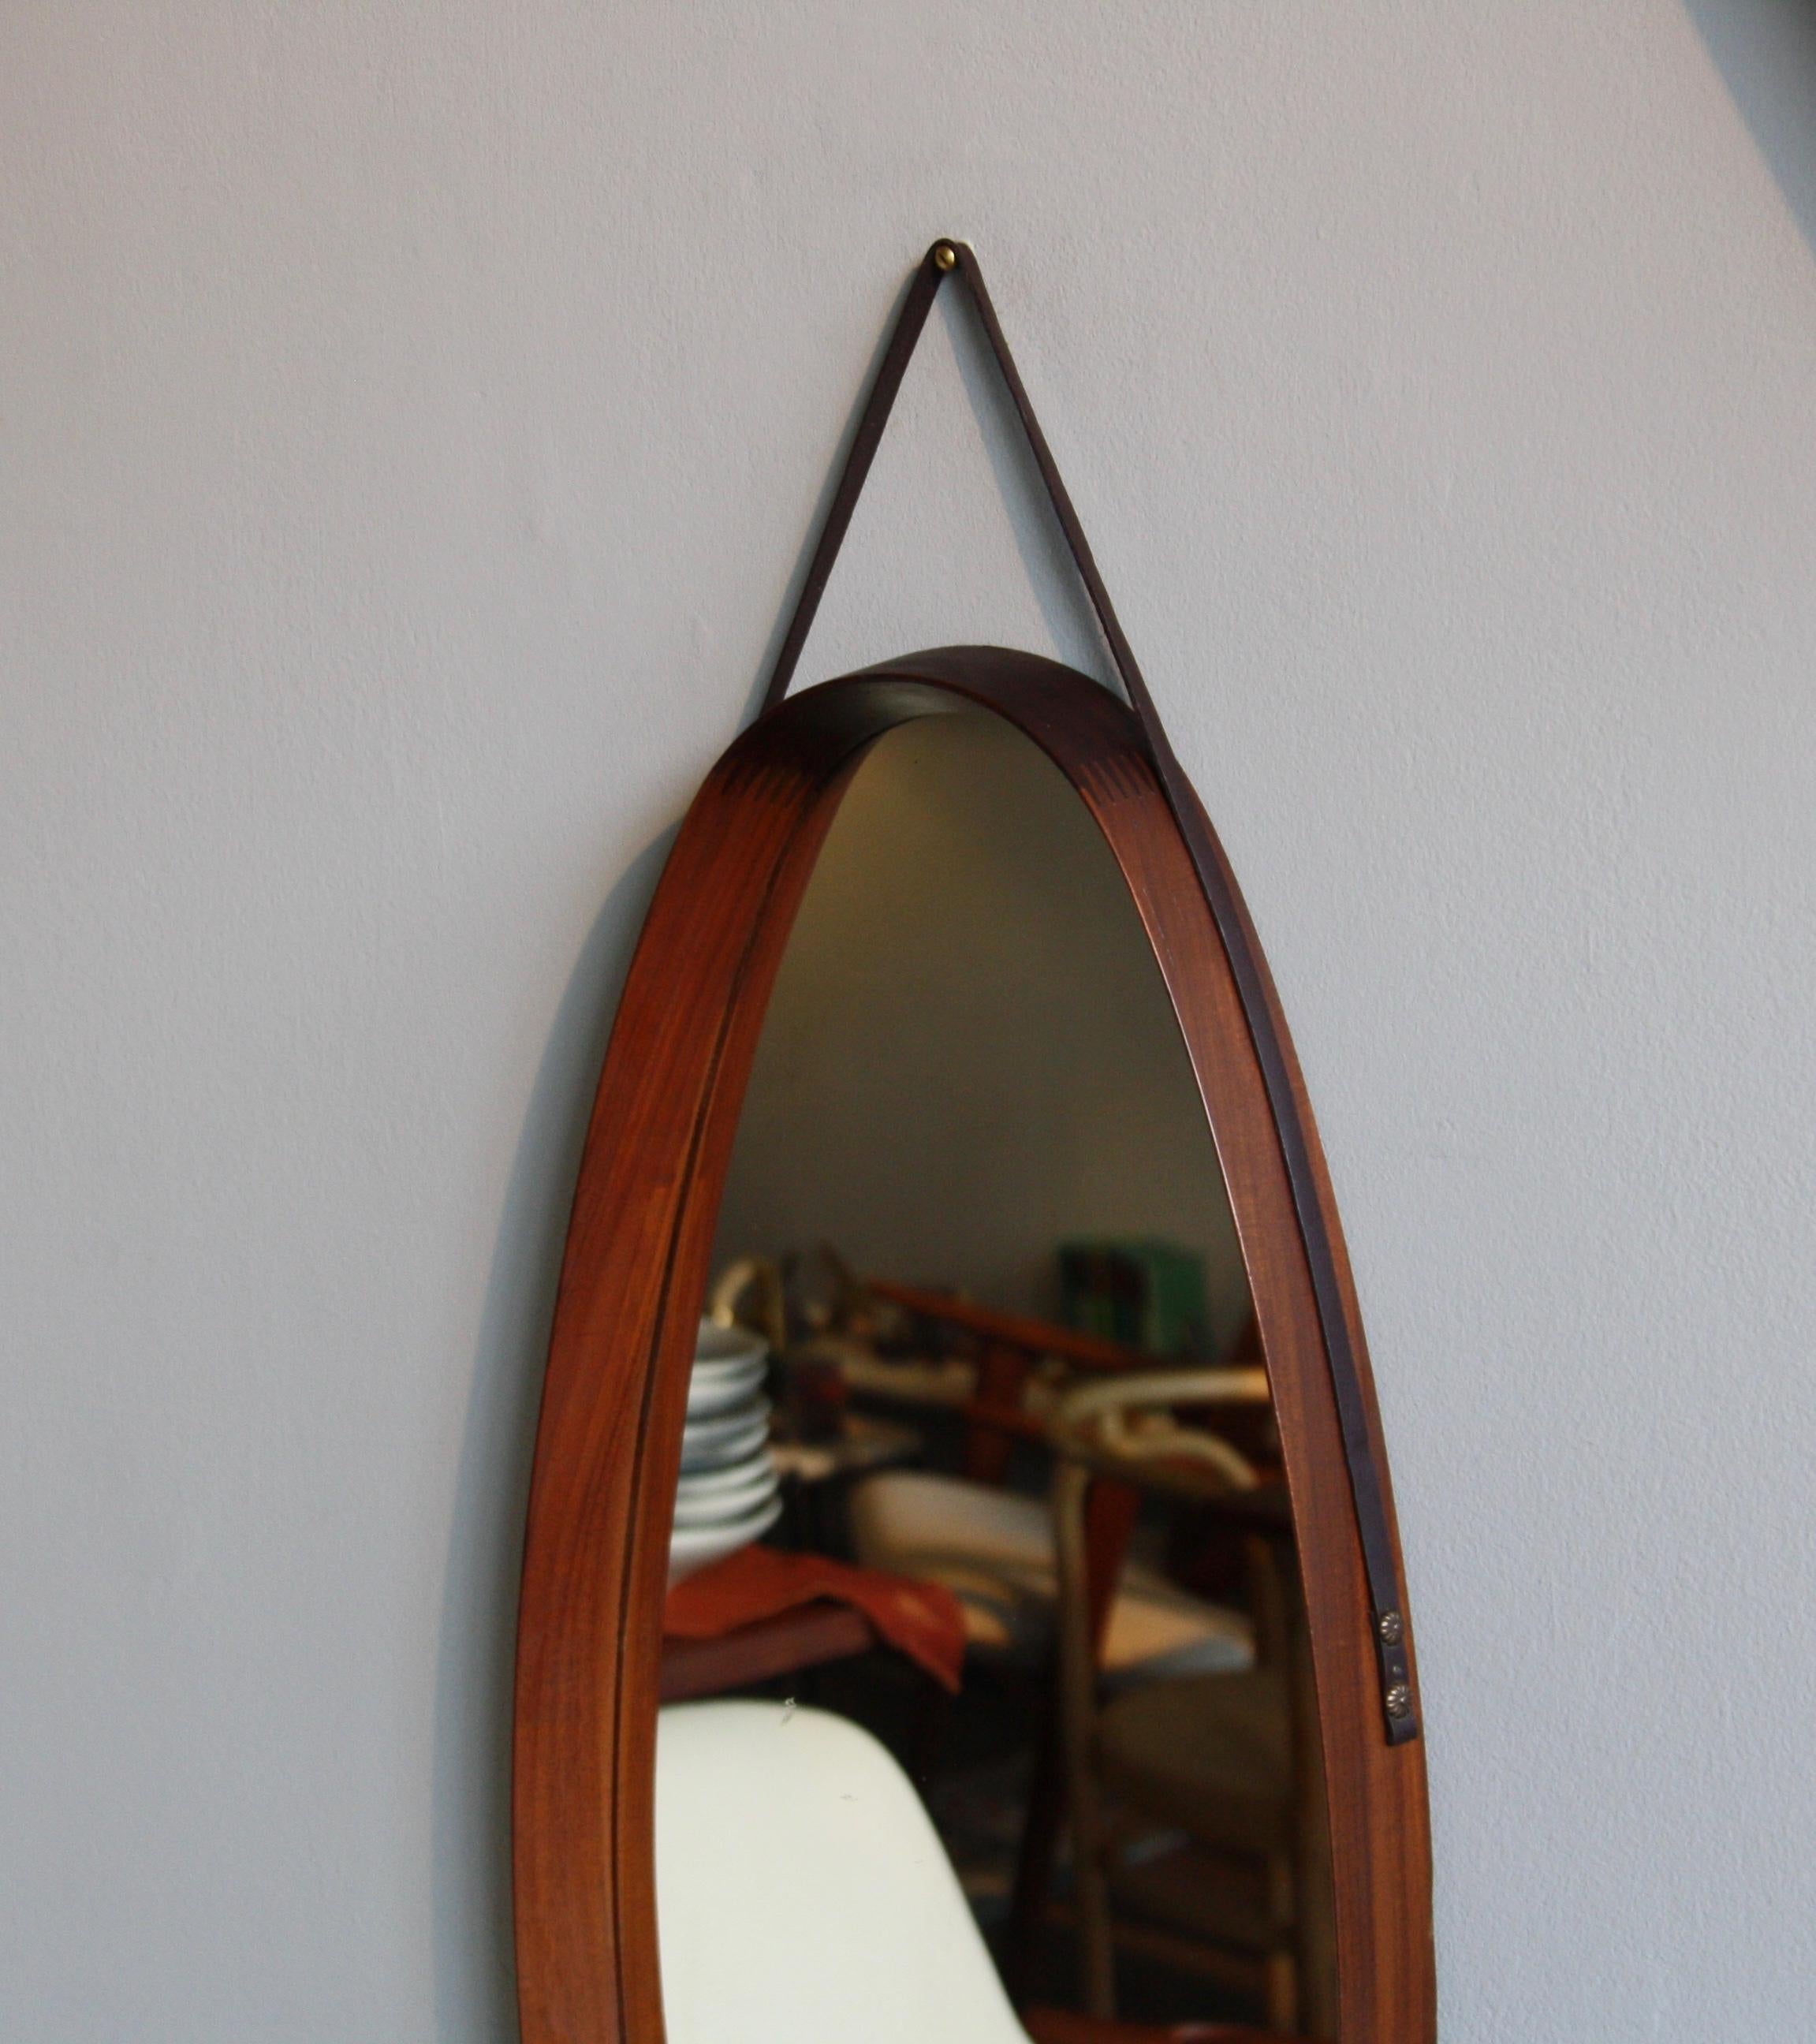 Teak Danish Oval Shaped Vintage Wall Mirror with Leather Hanging Strap, circa 1950